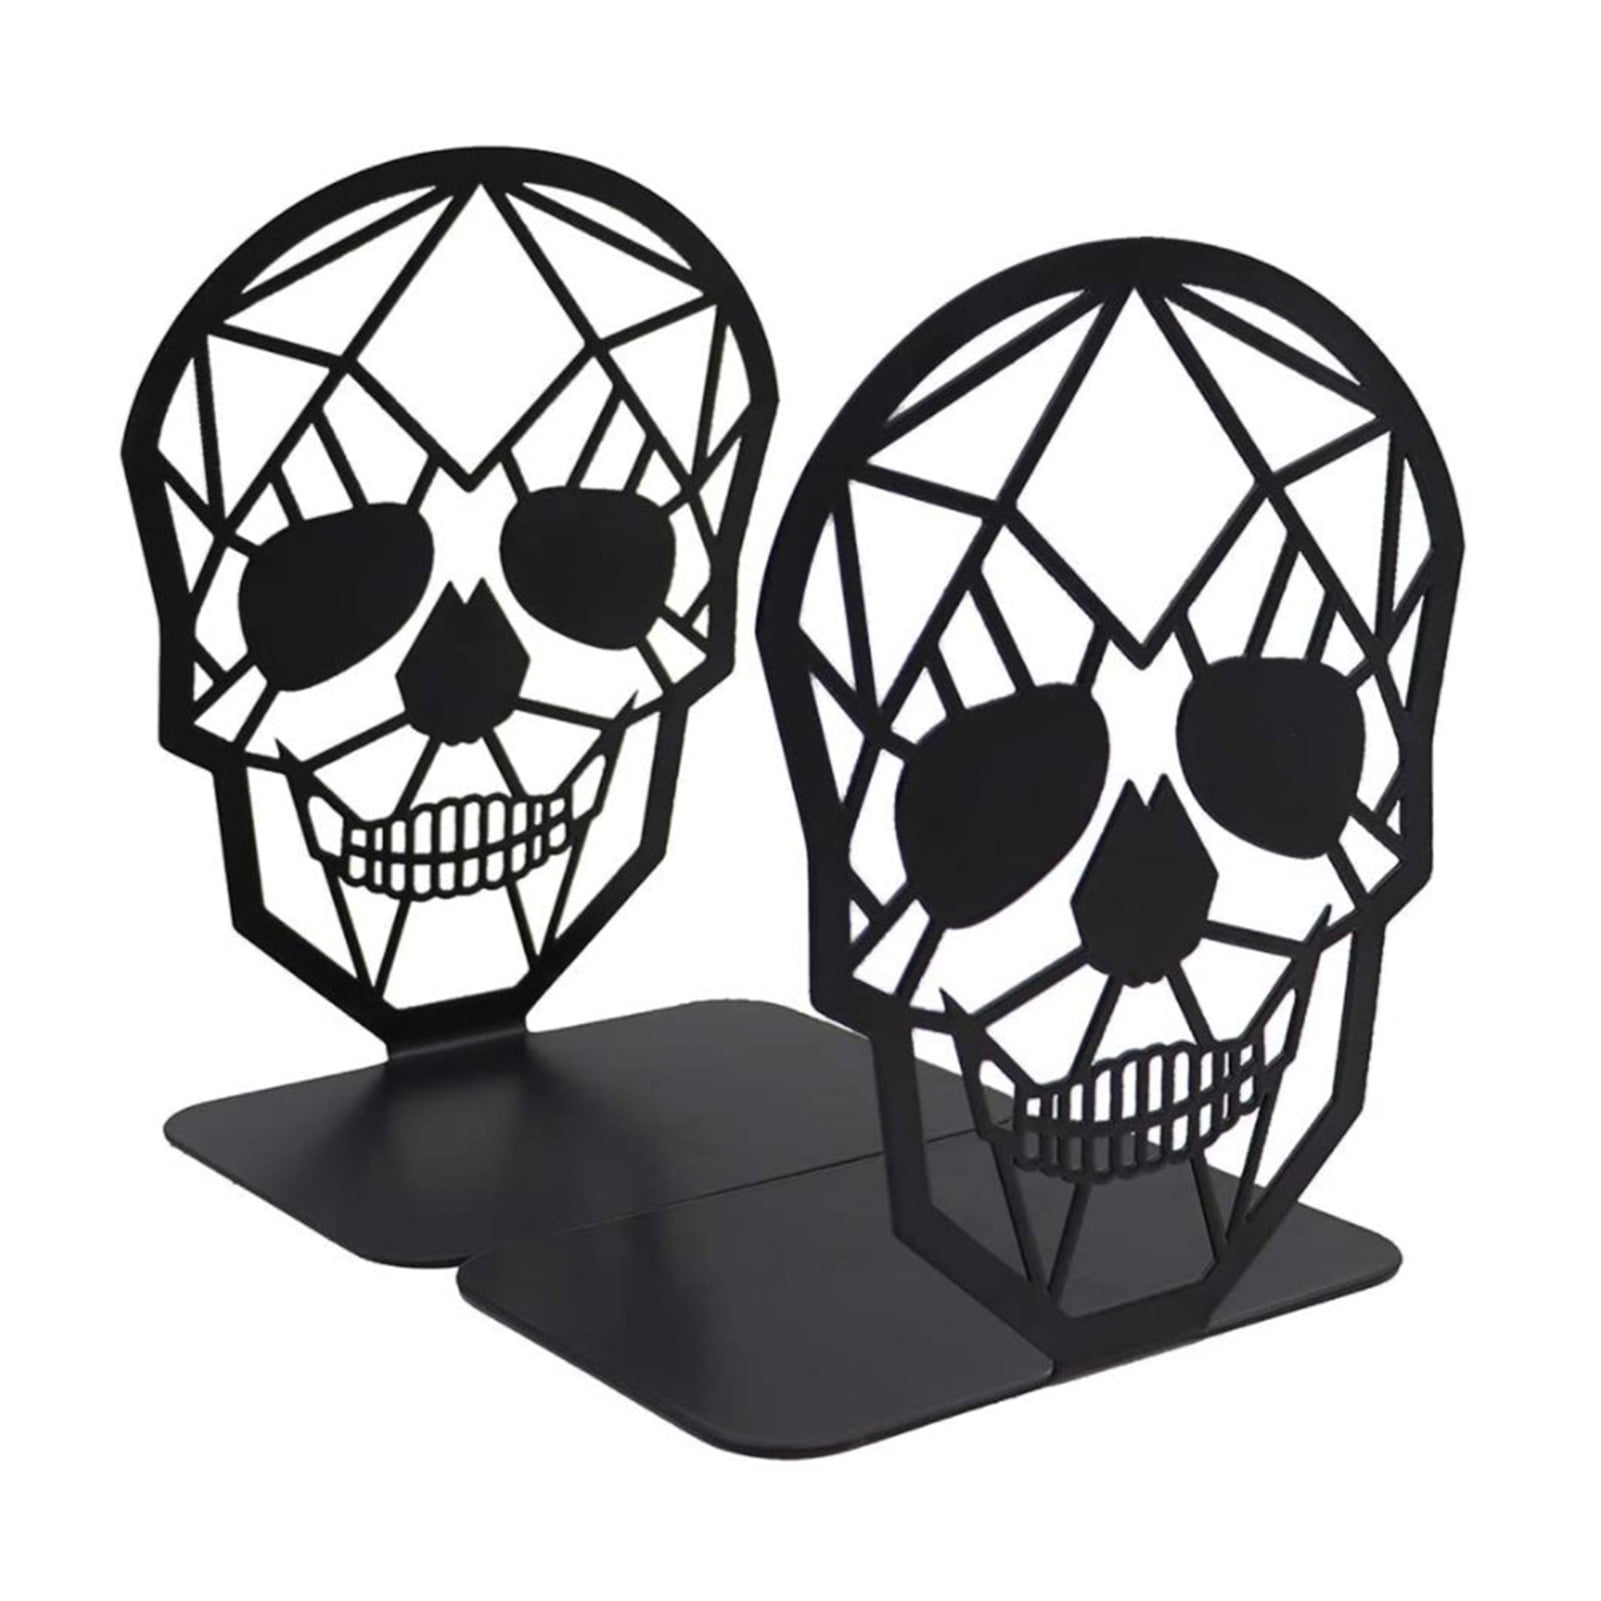 Unique Skull Shape Metal Bookends For BookShelf Black Skeleton Shaped Book End Holders Book Ends Room For Office Non-Skip And Non Slip School Home Sturdy And Durable